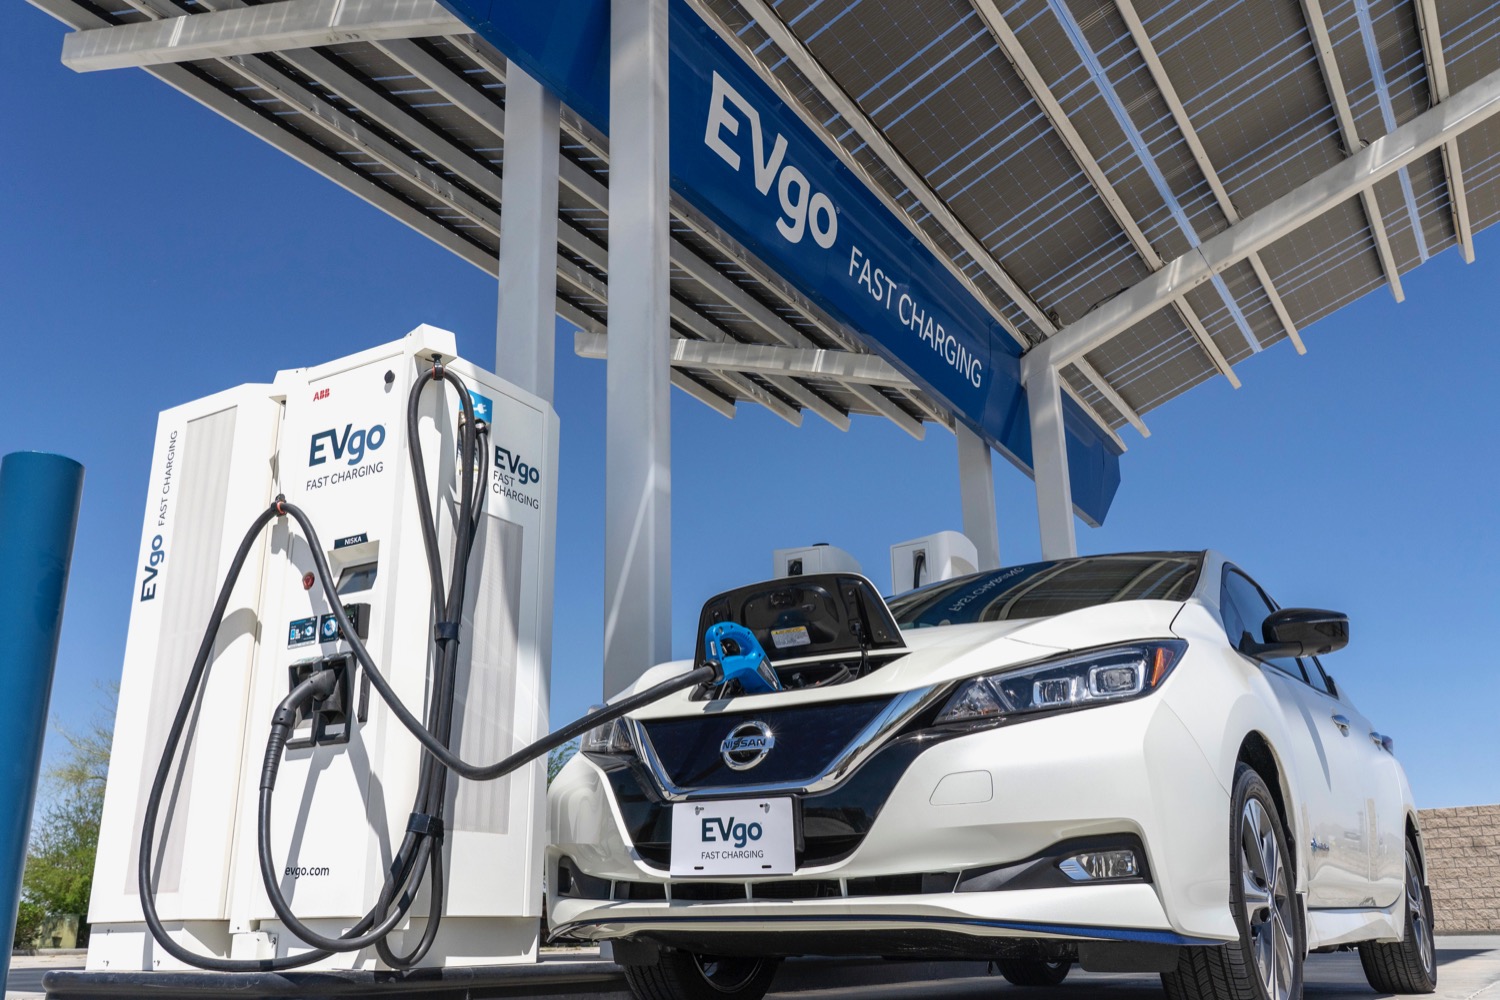 Volkswagen pairs with E.ON for 150 kW EV fast charger capable of